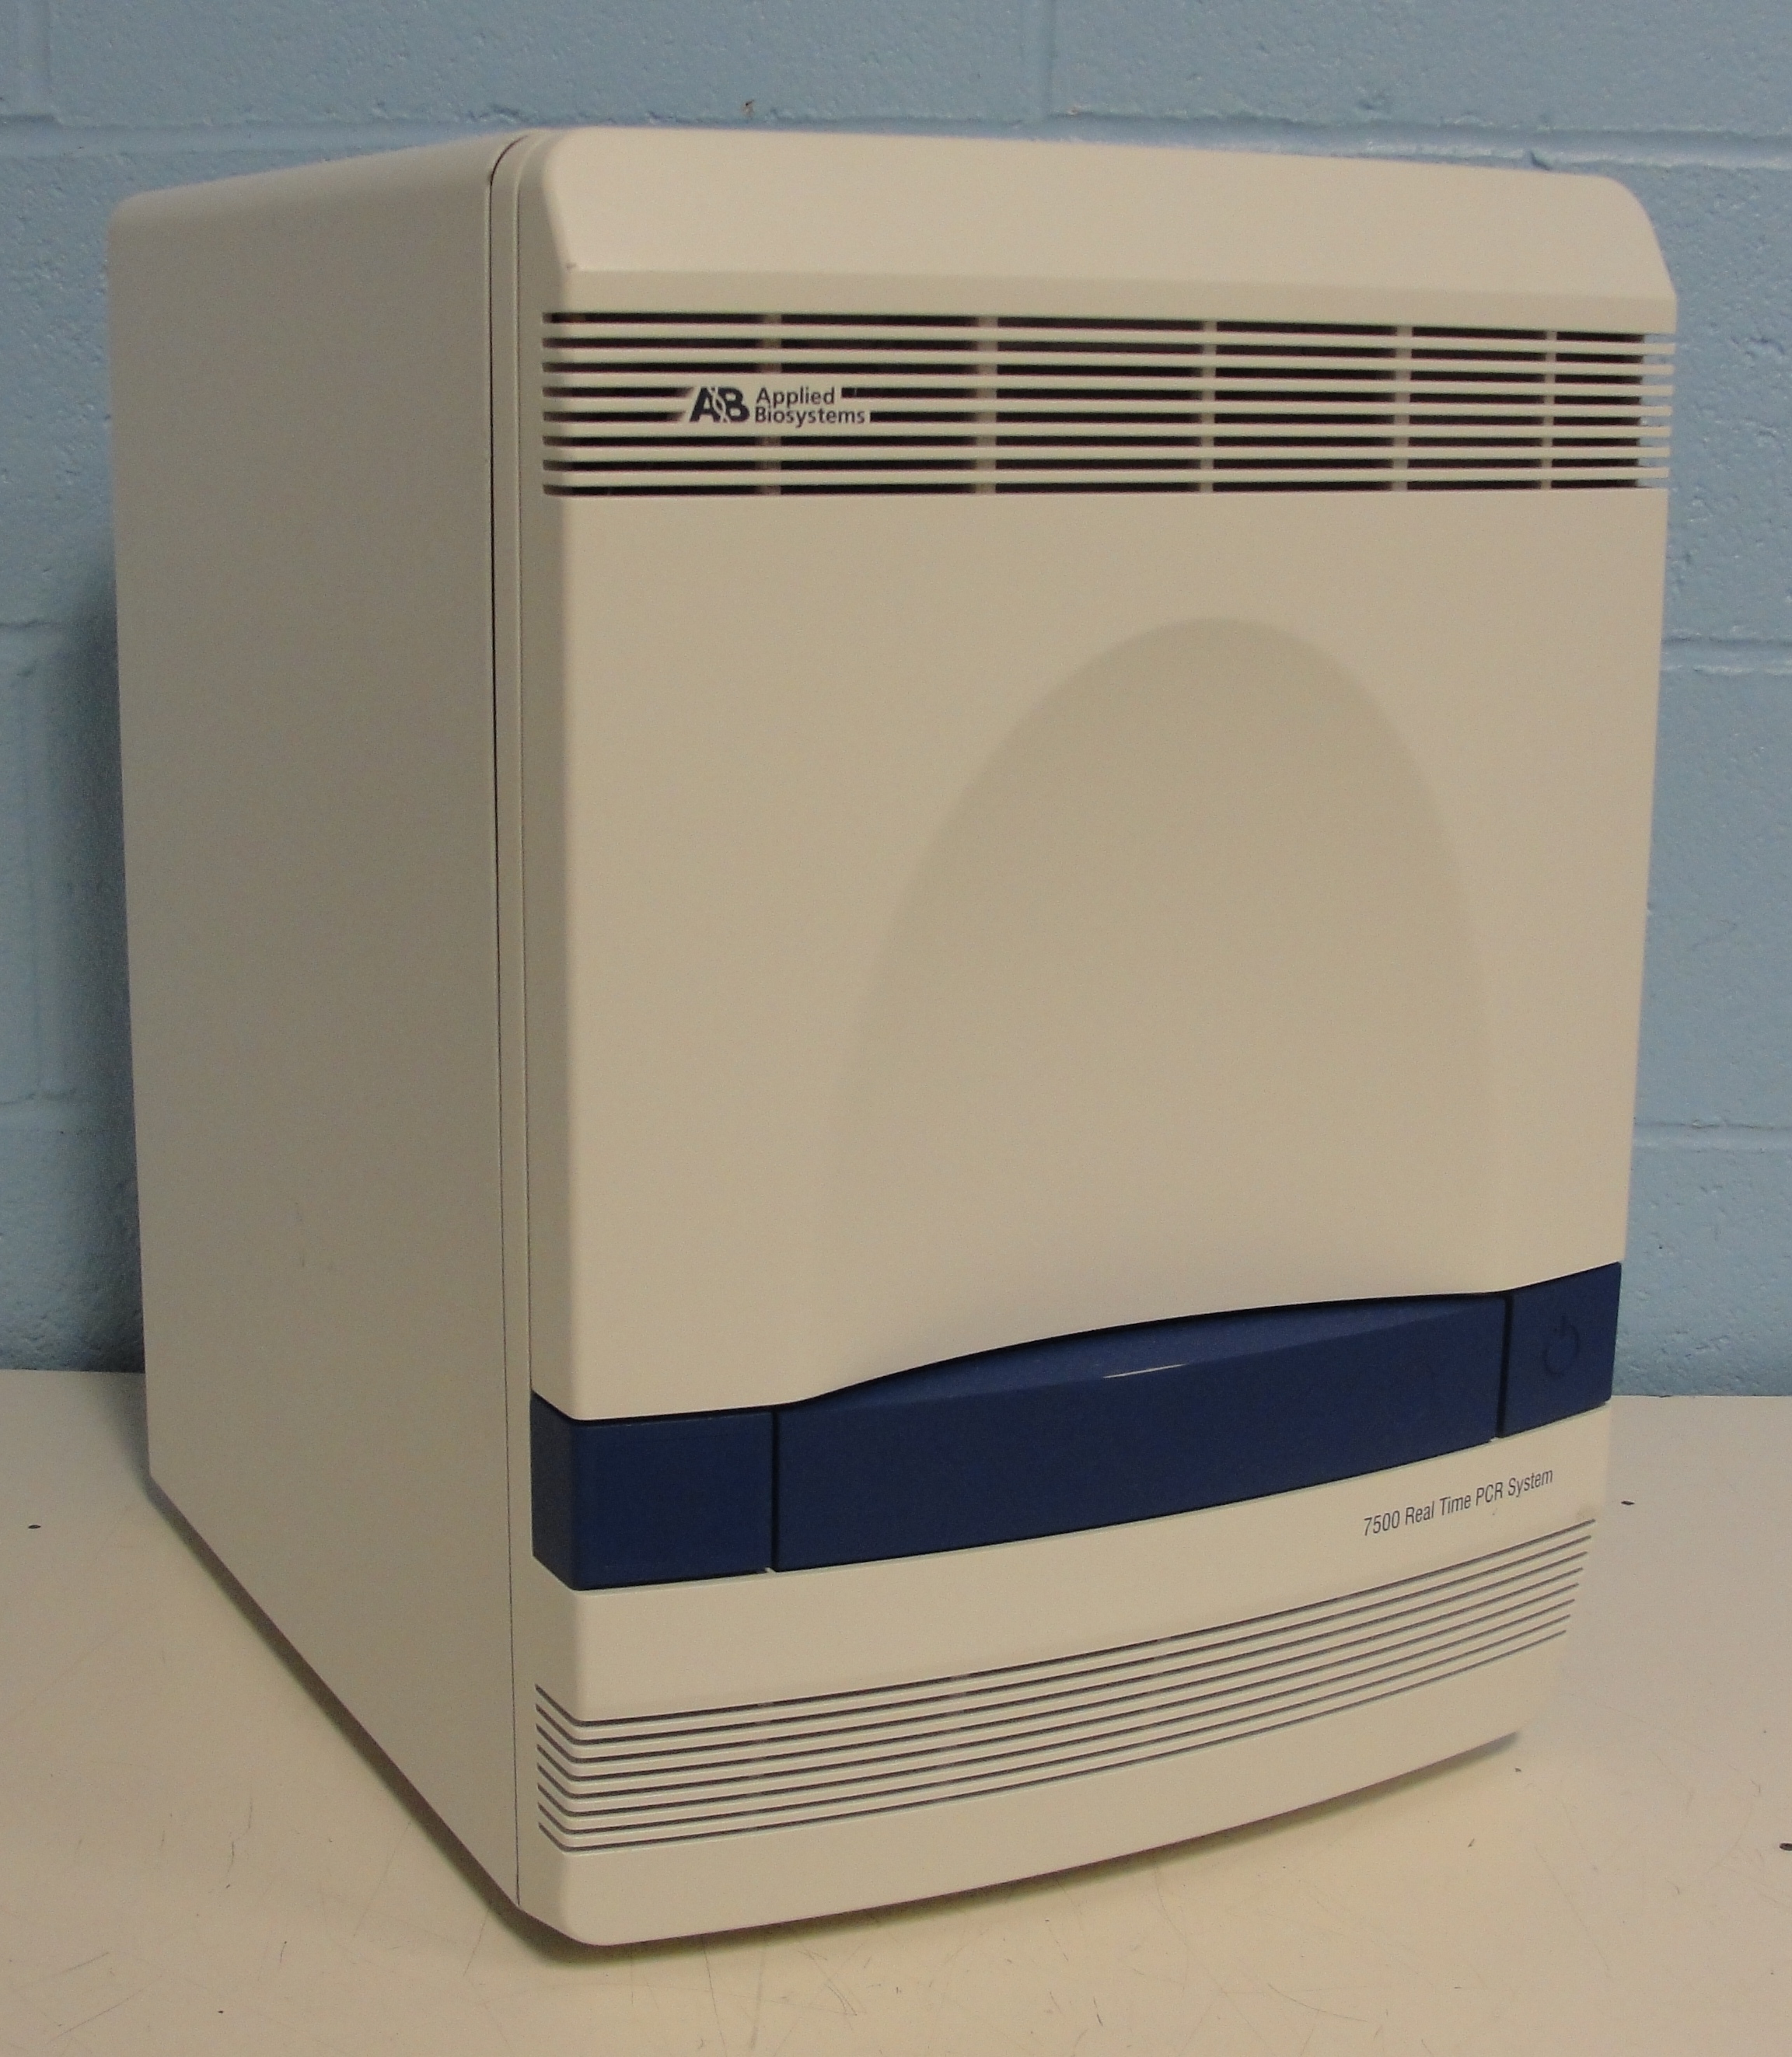 Applied biosystems 7500 fast real time pcr system manual